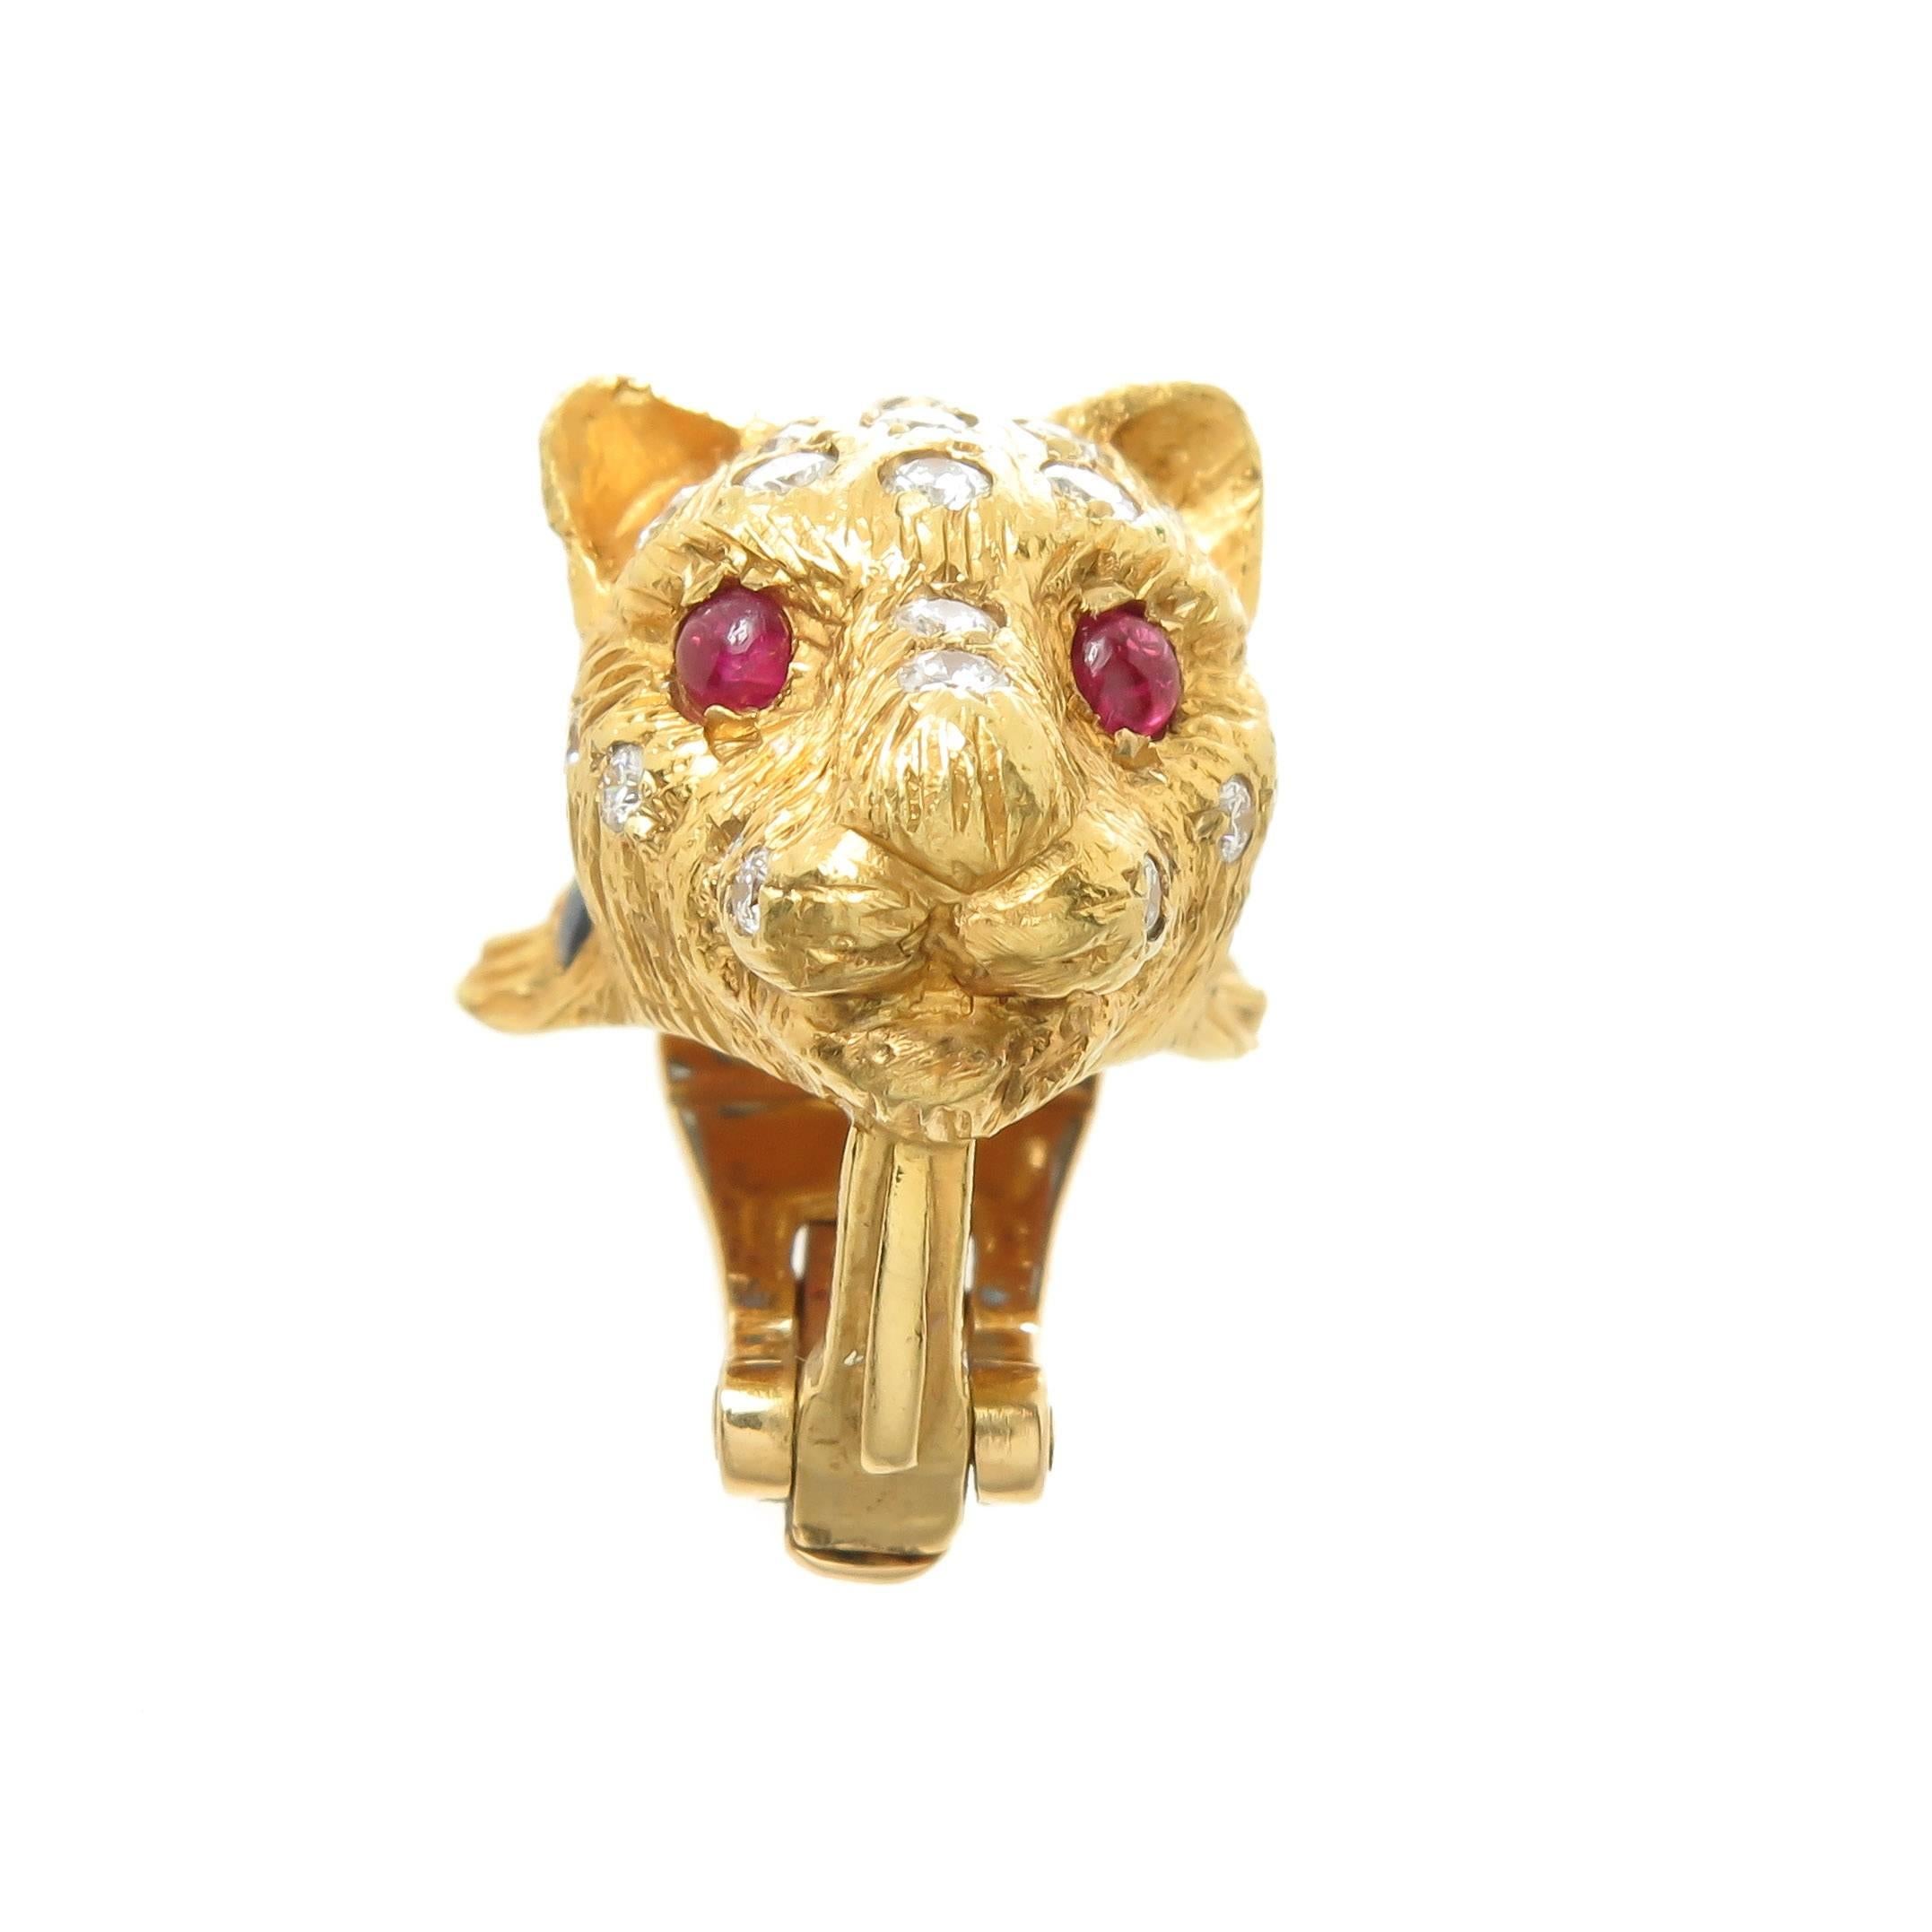 Circa 1990 18K Yellow Gold Cougar Earrings, Finely detailed and textured and measuring 1 inch in length and 5/8 inch wide. Set with Round Brilliant cut Diamonds totaling 1 carat and grading as G-H in color and VS in Clarity, Cabochon Rubies for the